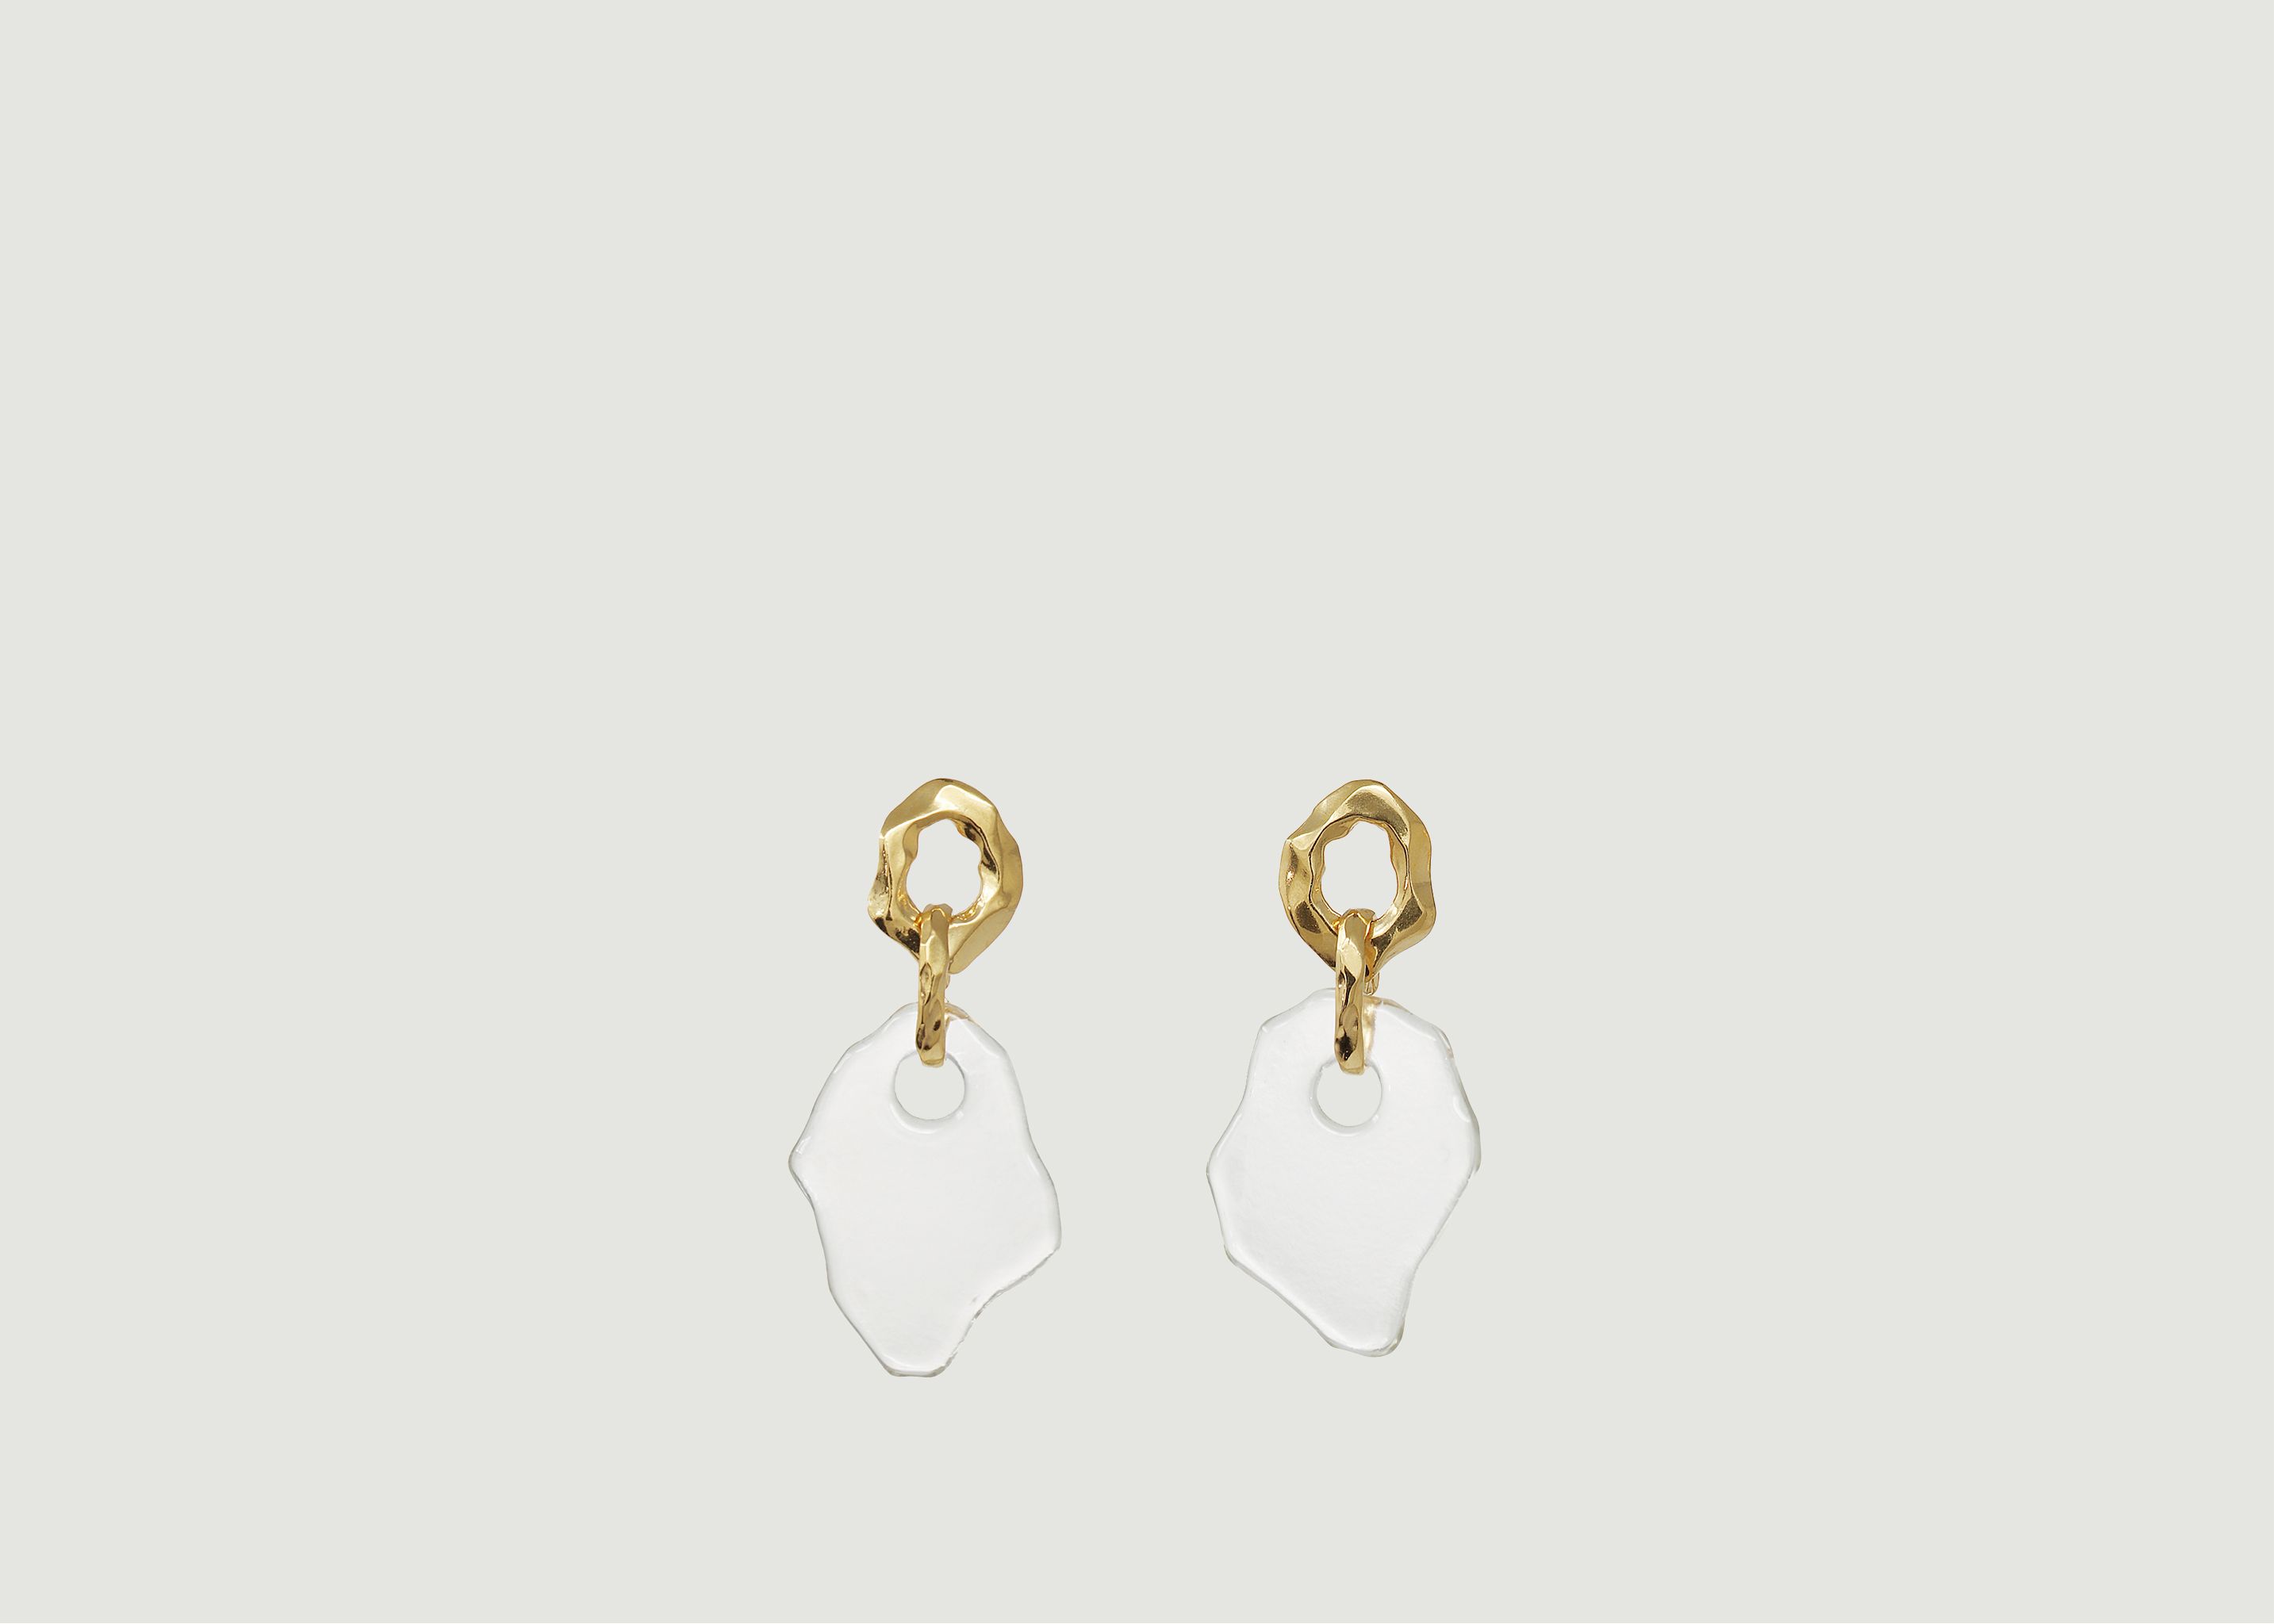 Canyon earrings - CLED